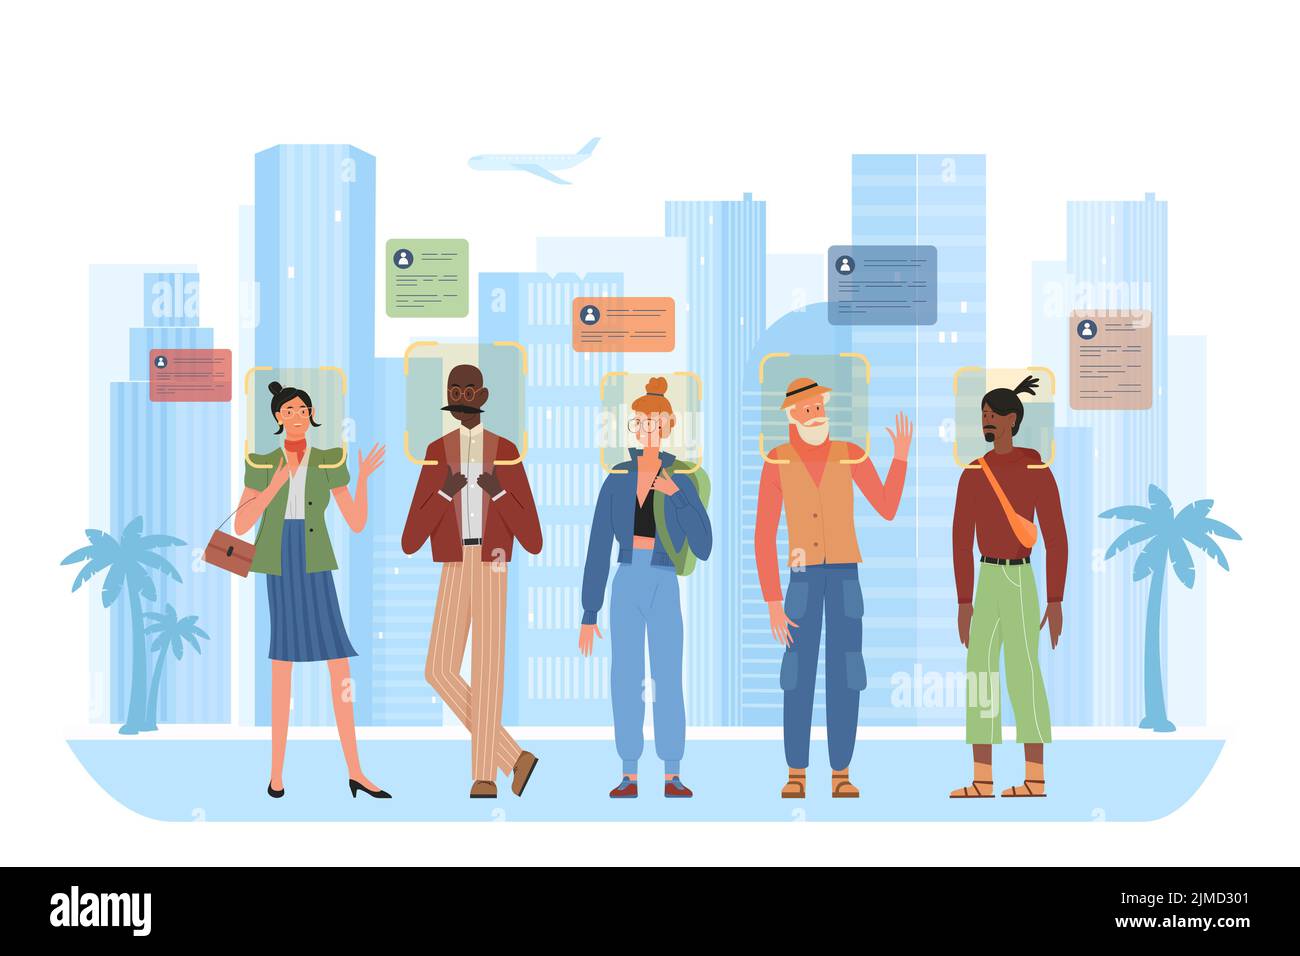 Face recognition of people on city street vector illustration. Cartoon crowd of pedestrians walking on road under AI surveillance, control and identification with artificial intelligence system Stock Vector